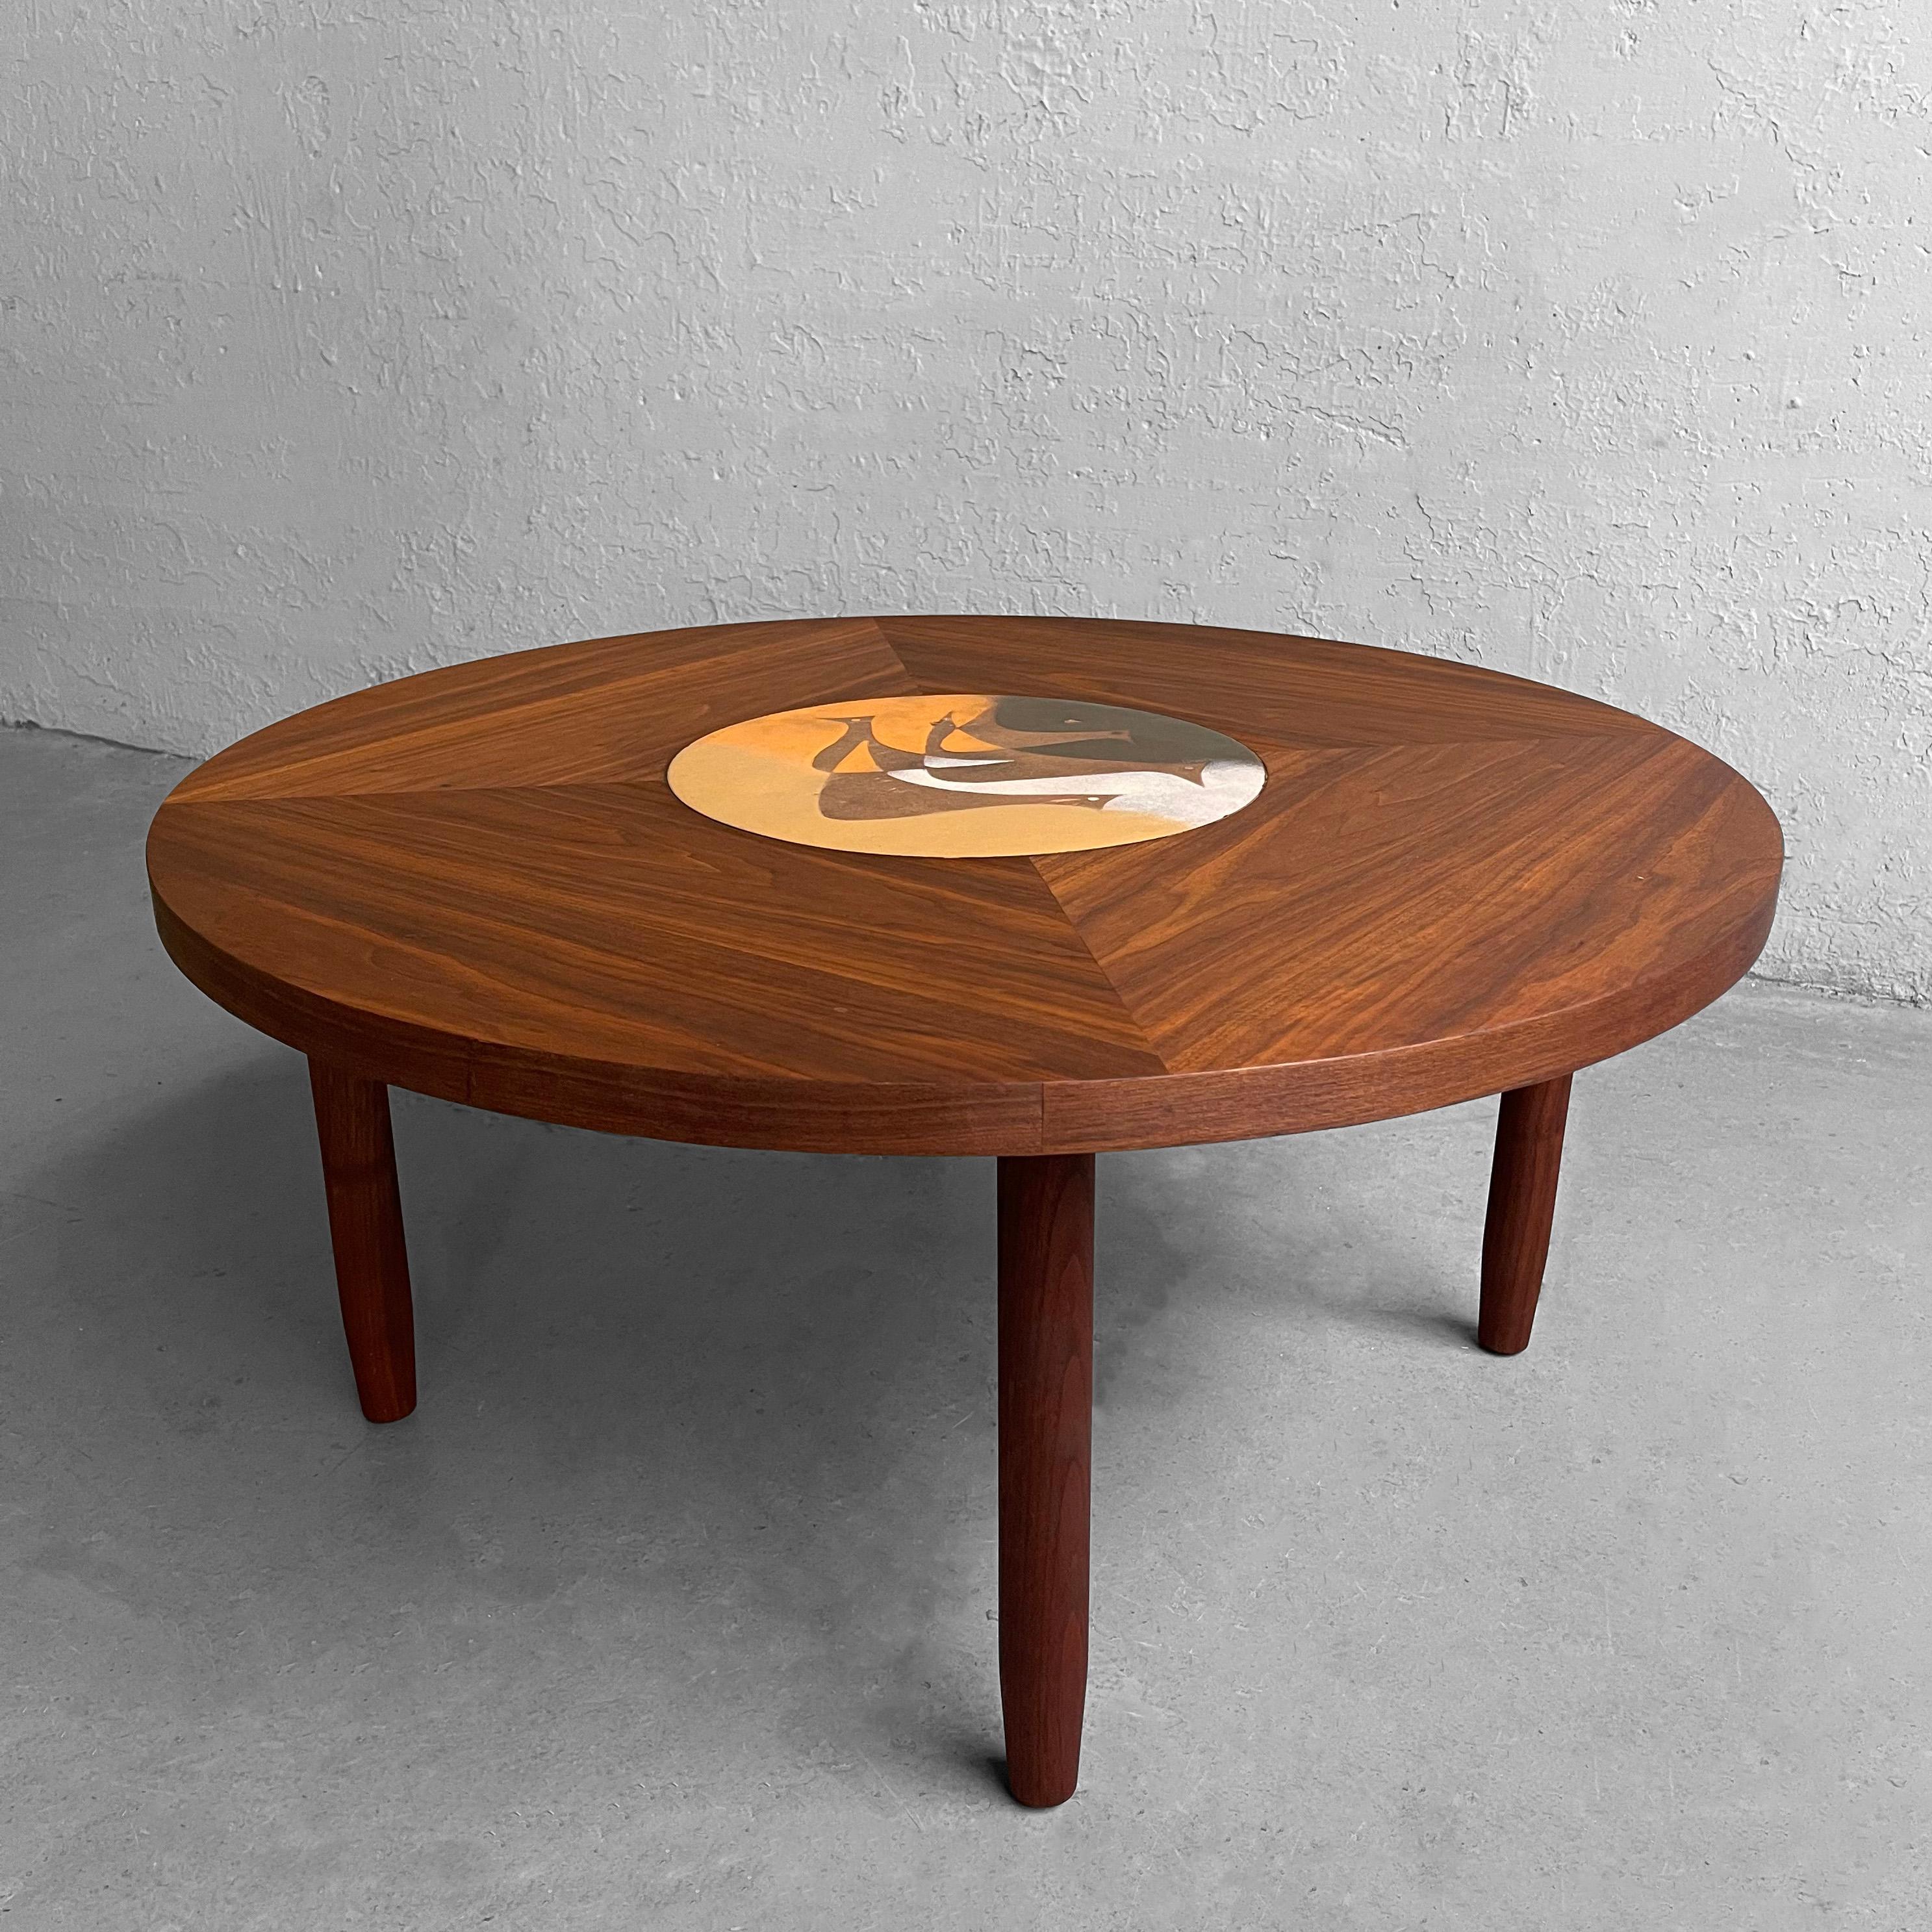 Scandinavian modern, round, walnut coffee table features a segmented top with abstract enamel bird inlay detail.